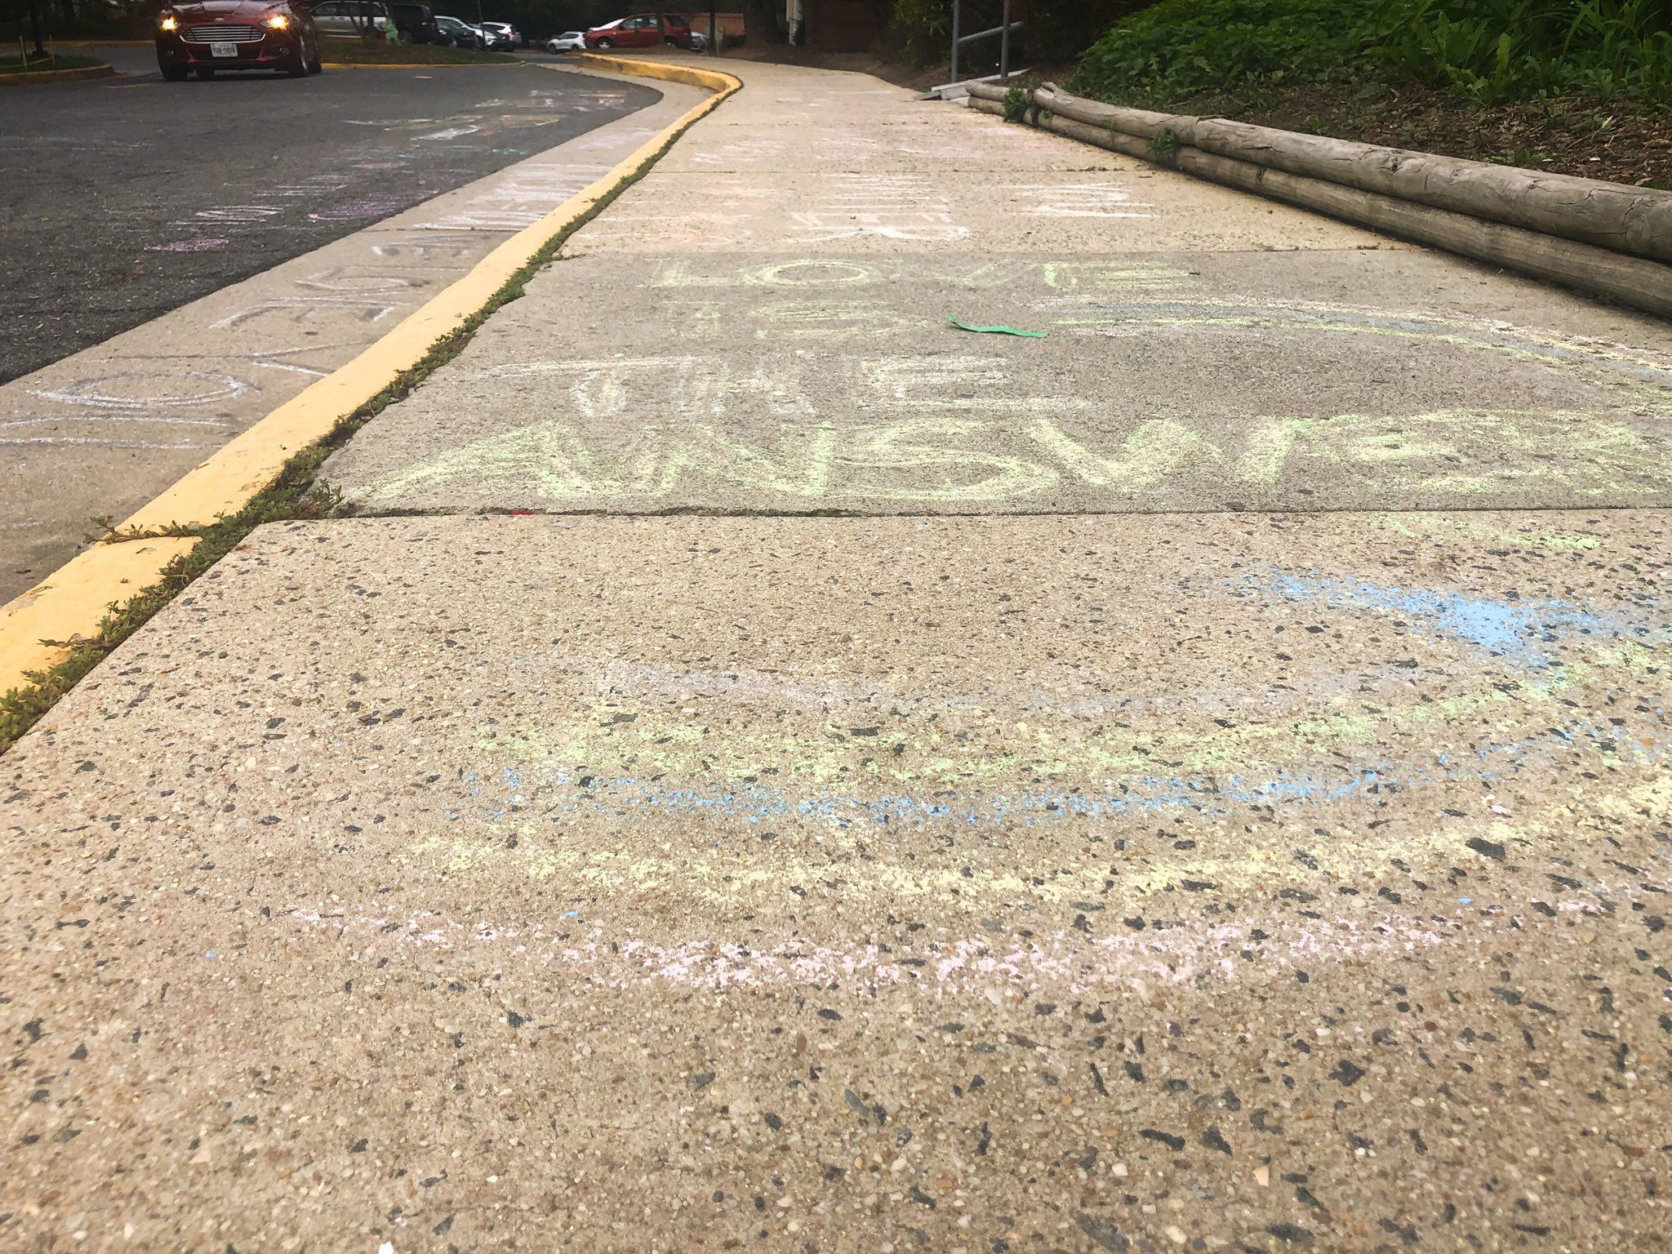 Messages of support were left on the sidewalk in front of the Jewish Community Center of Northern Virginia, in Annandale, two days after swastikas were spray-painted on the building. (WTOP/Melissa Howell)